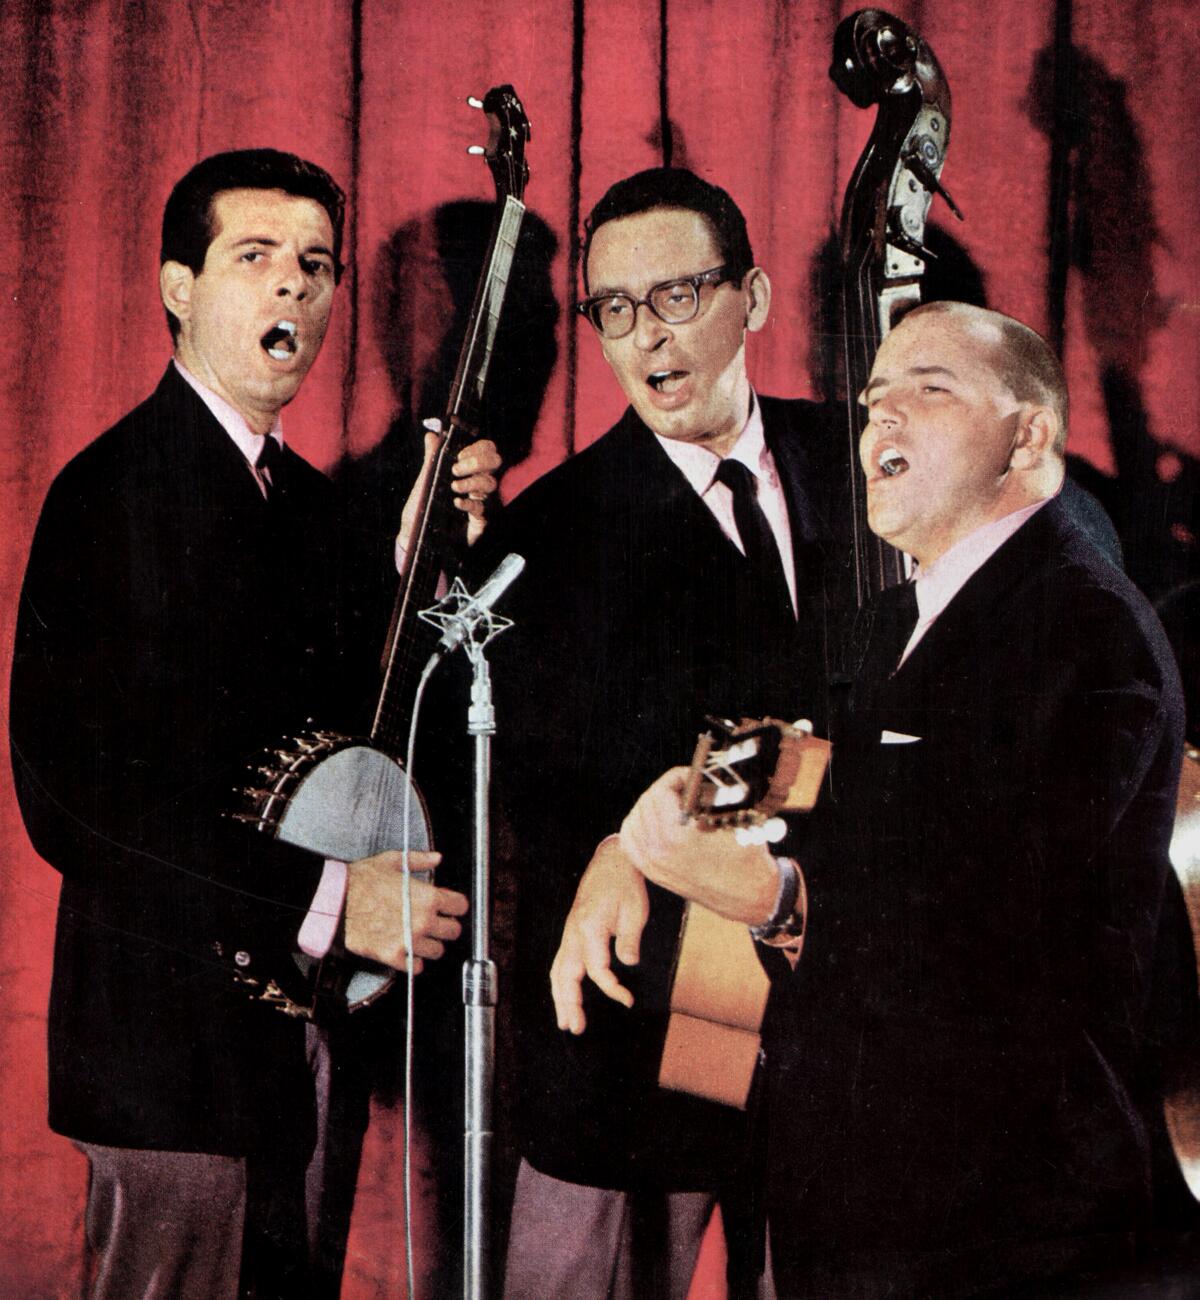 Three musicians in dark suits share a microphone and play instruments.